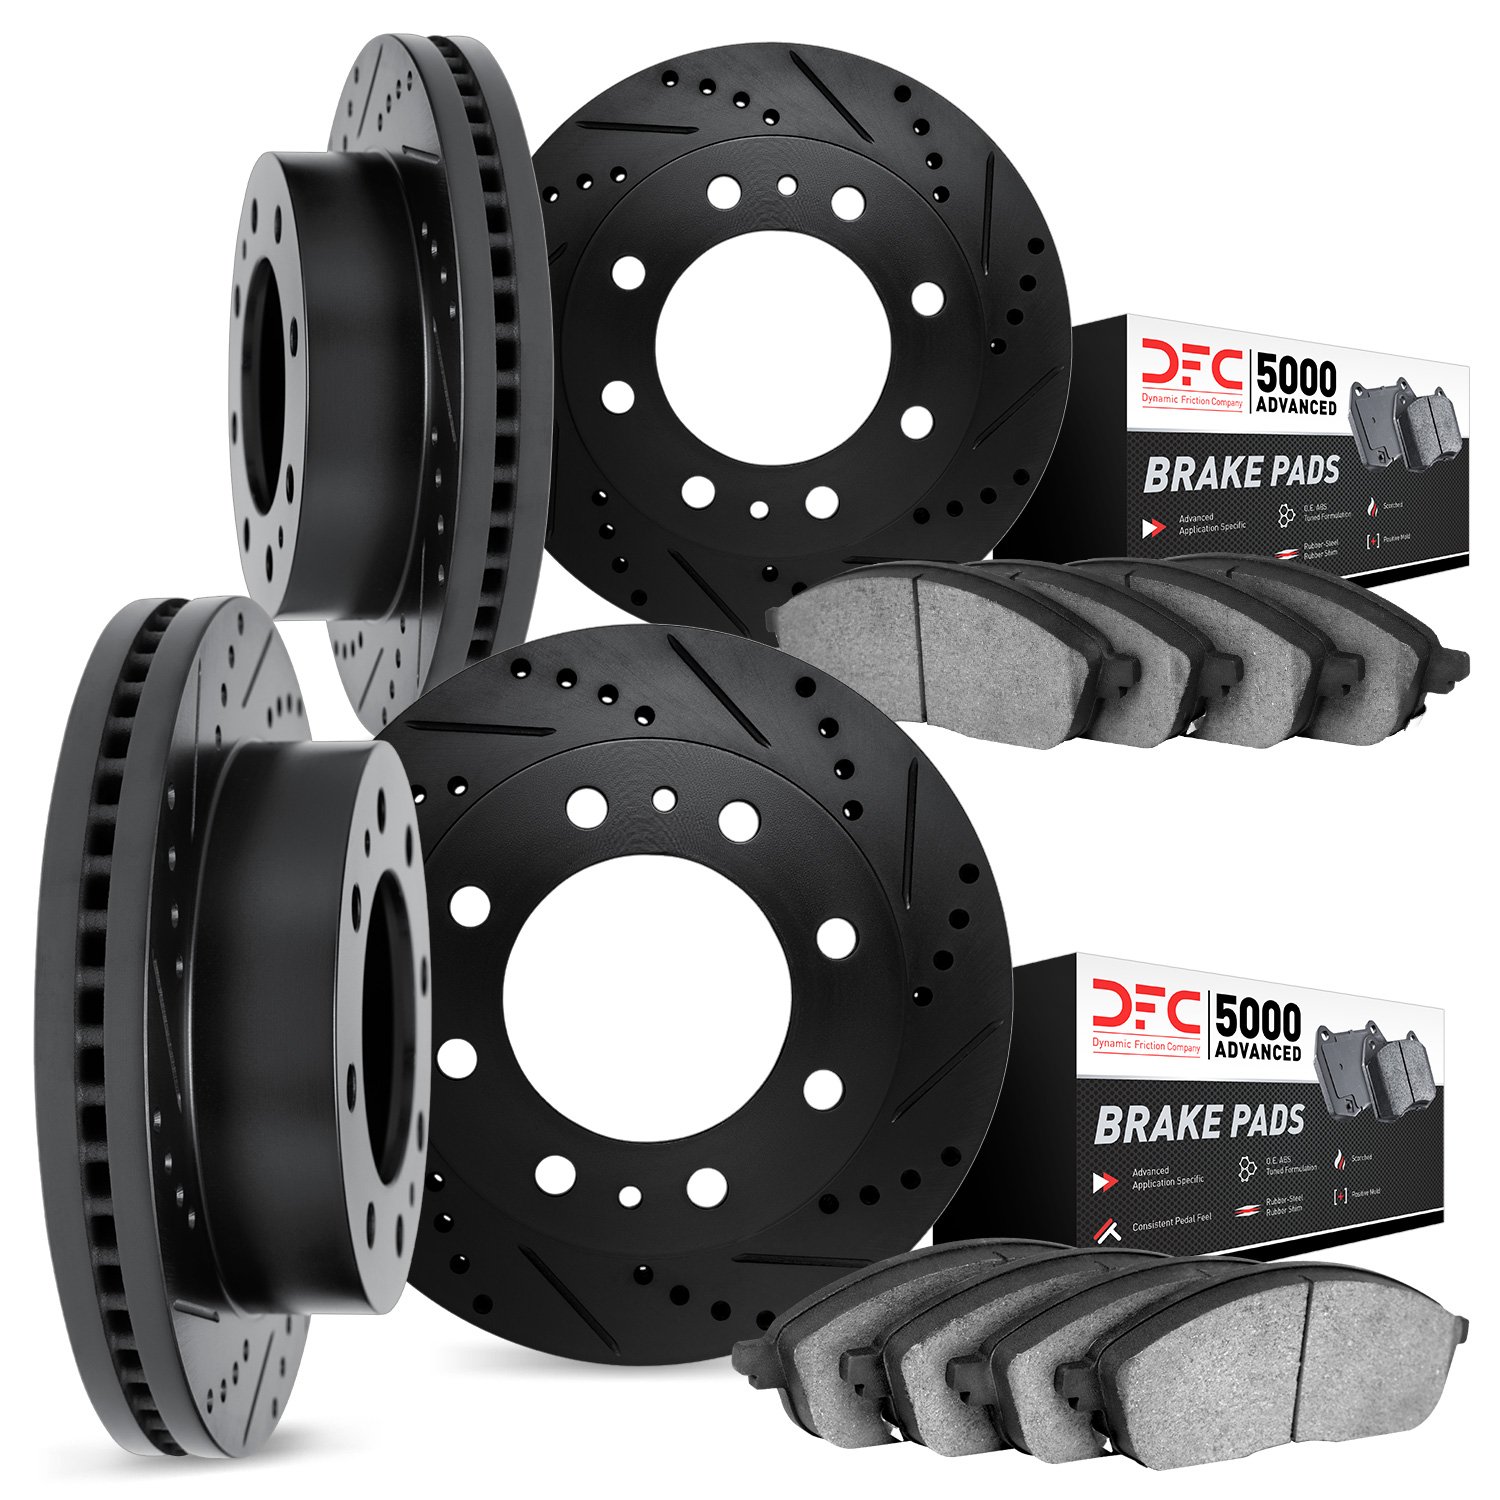 8504-48011 Drilled/Slotted Brake Rotors w/5000 Advanced Brake Pads Kit [Black], 2003-2005 GM, Position: Front and Rear